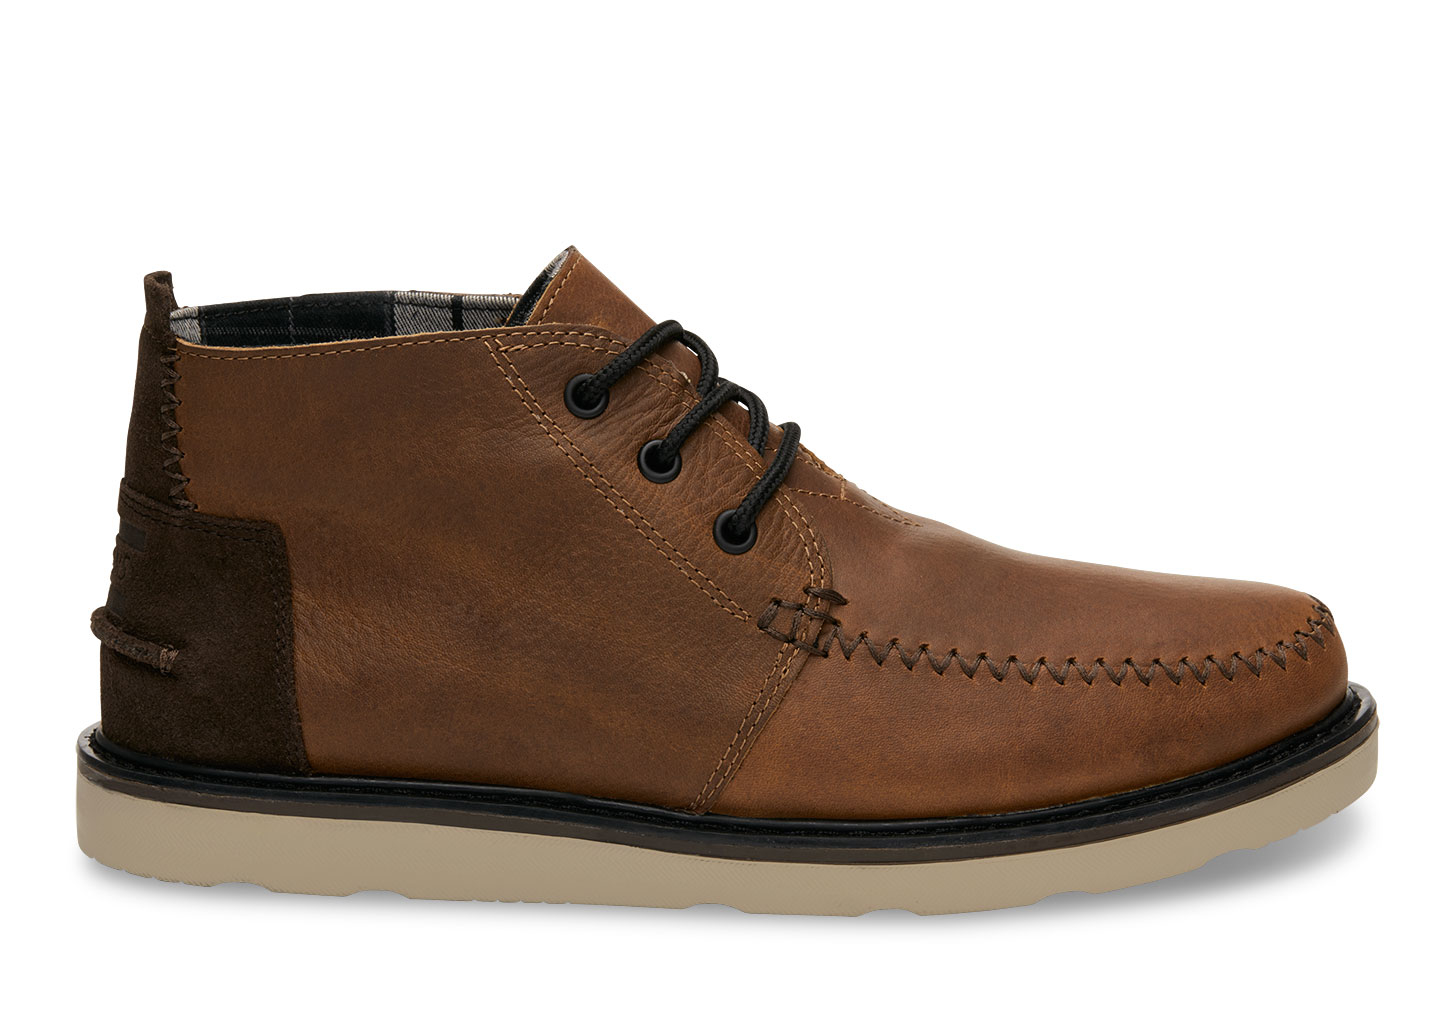 Lyst - Toms Waterproof Brown Leather Men's Chukka Boots in Brown for Men